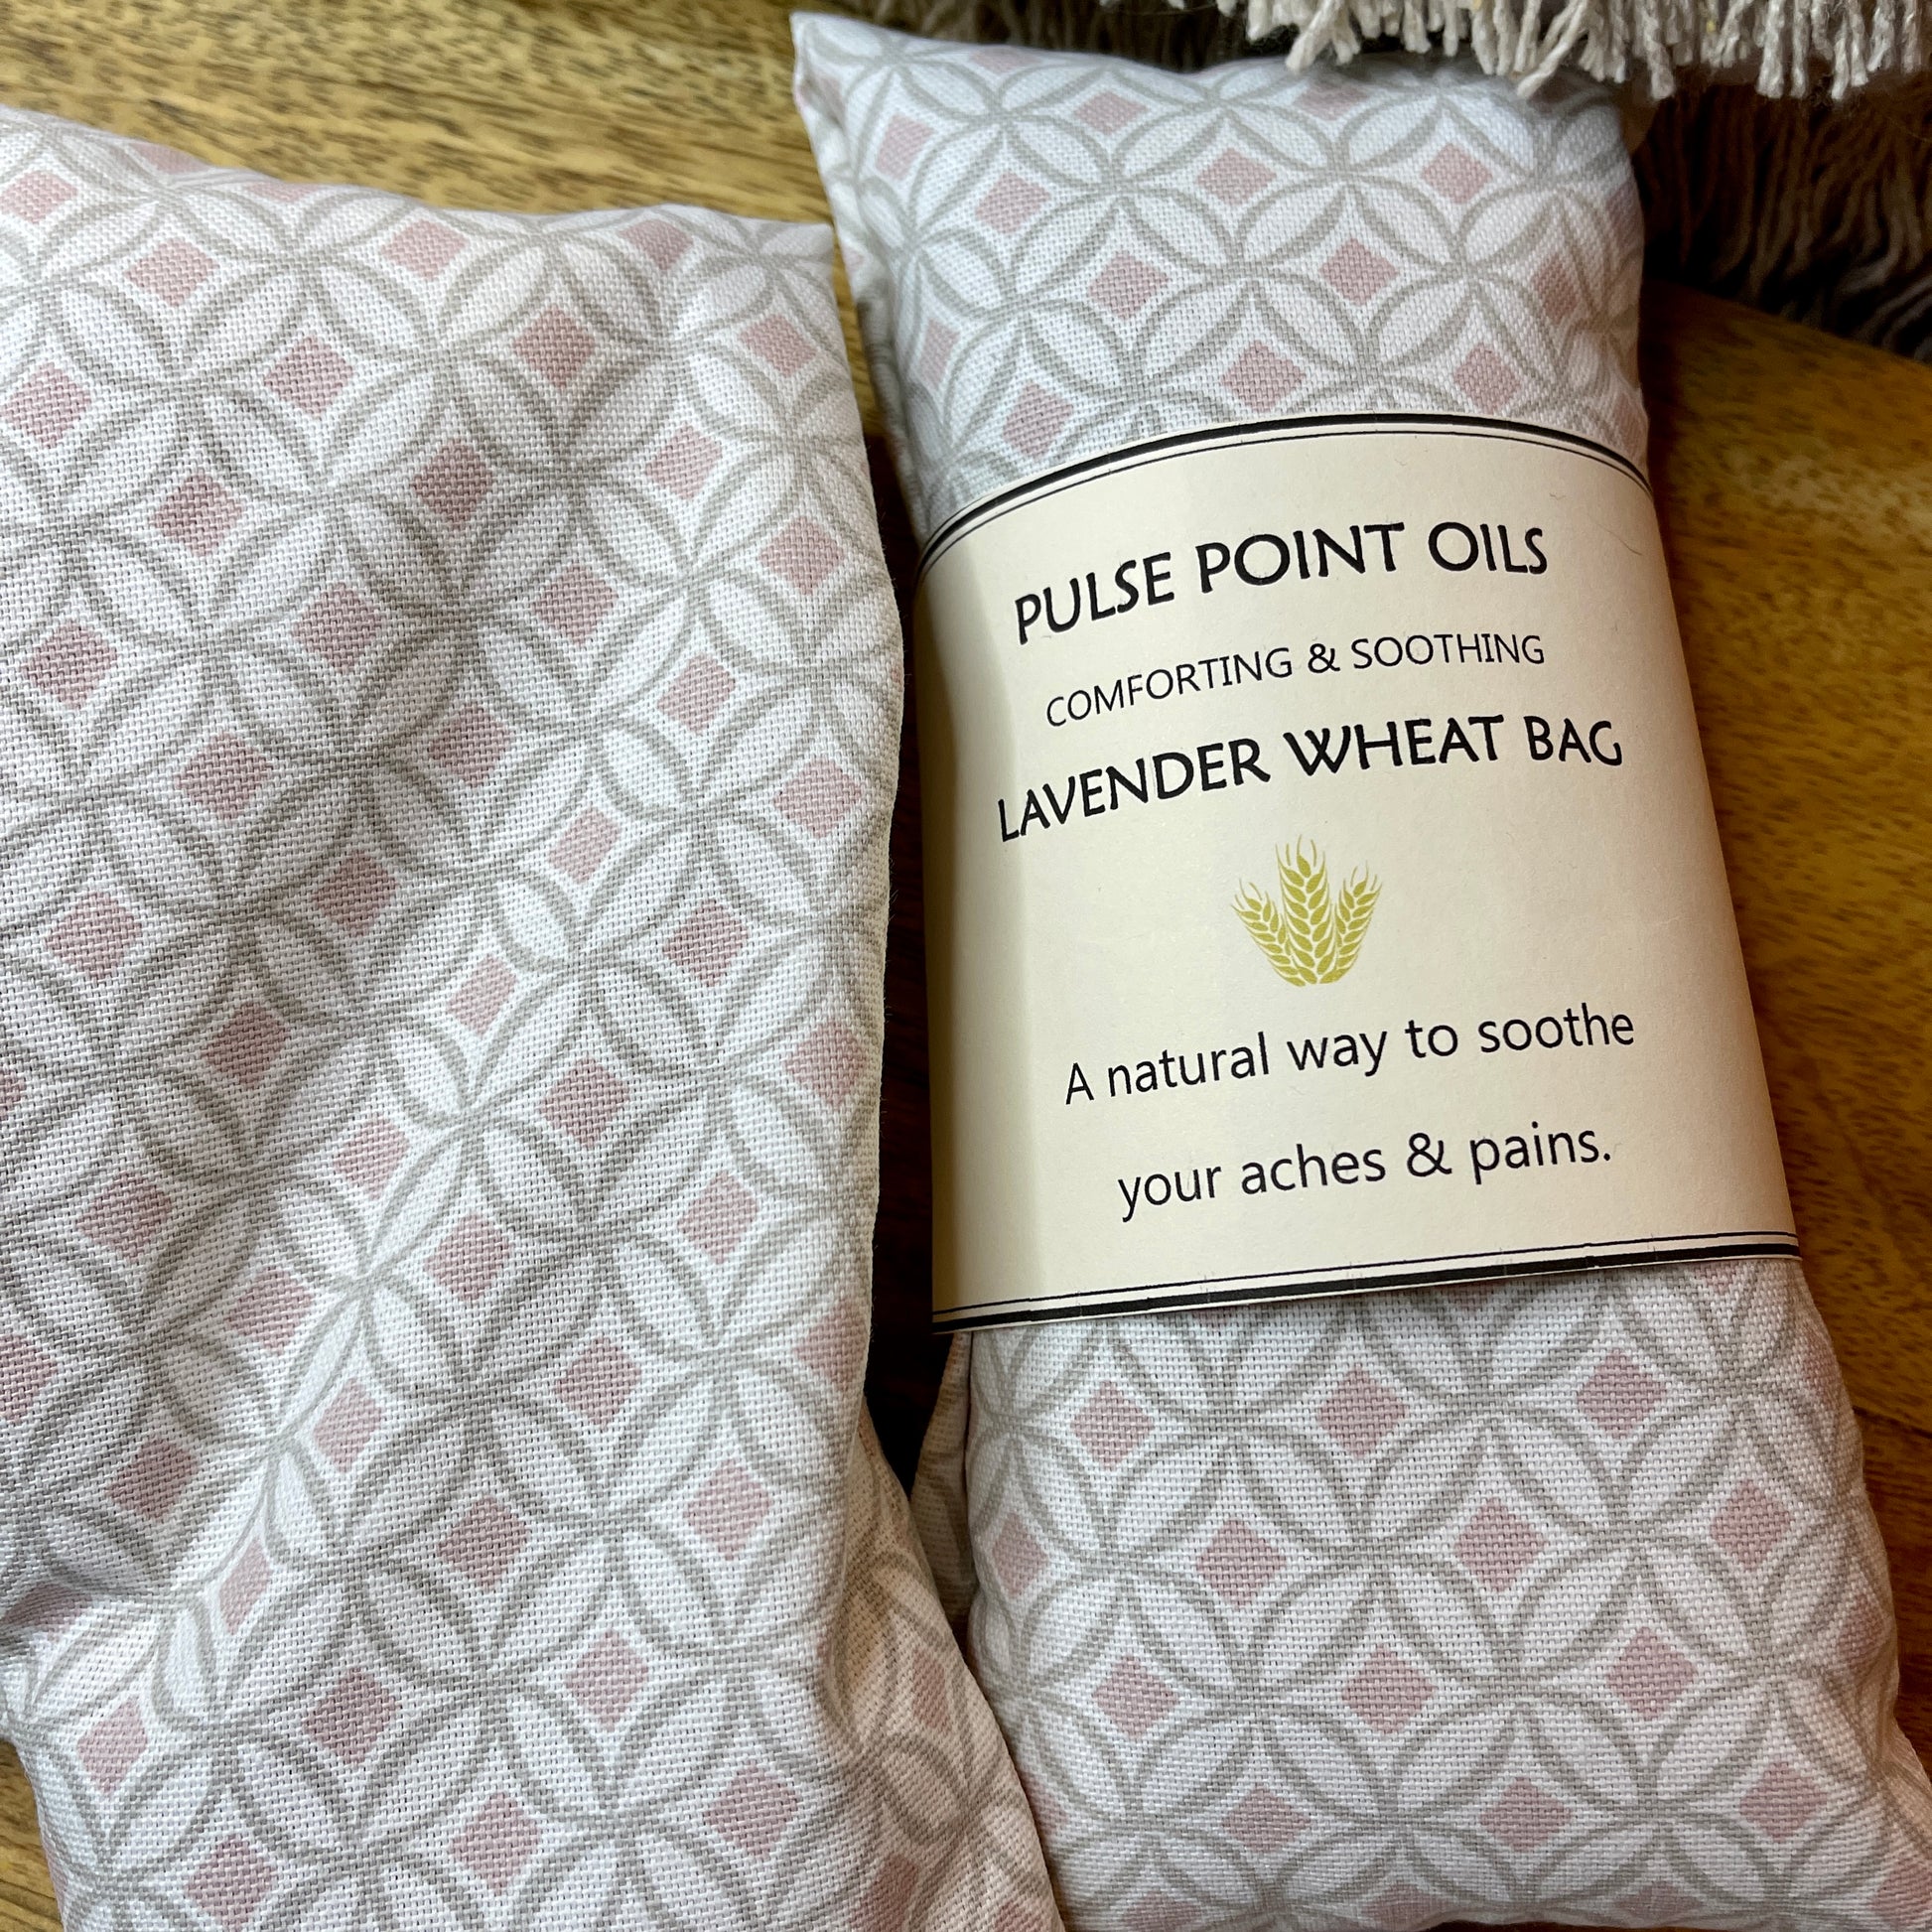 Long aromatherapy heat wrap wheat bag, soft pink and grey print ottis blush, filled with whole wheat and lavender flower